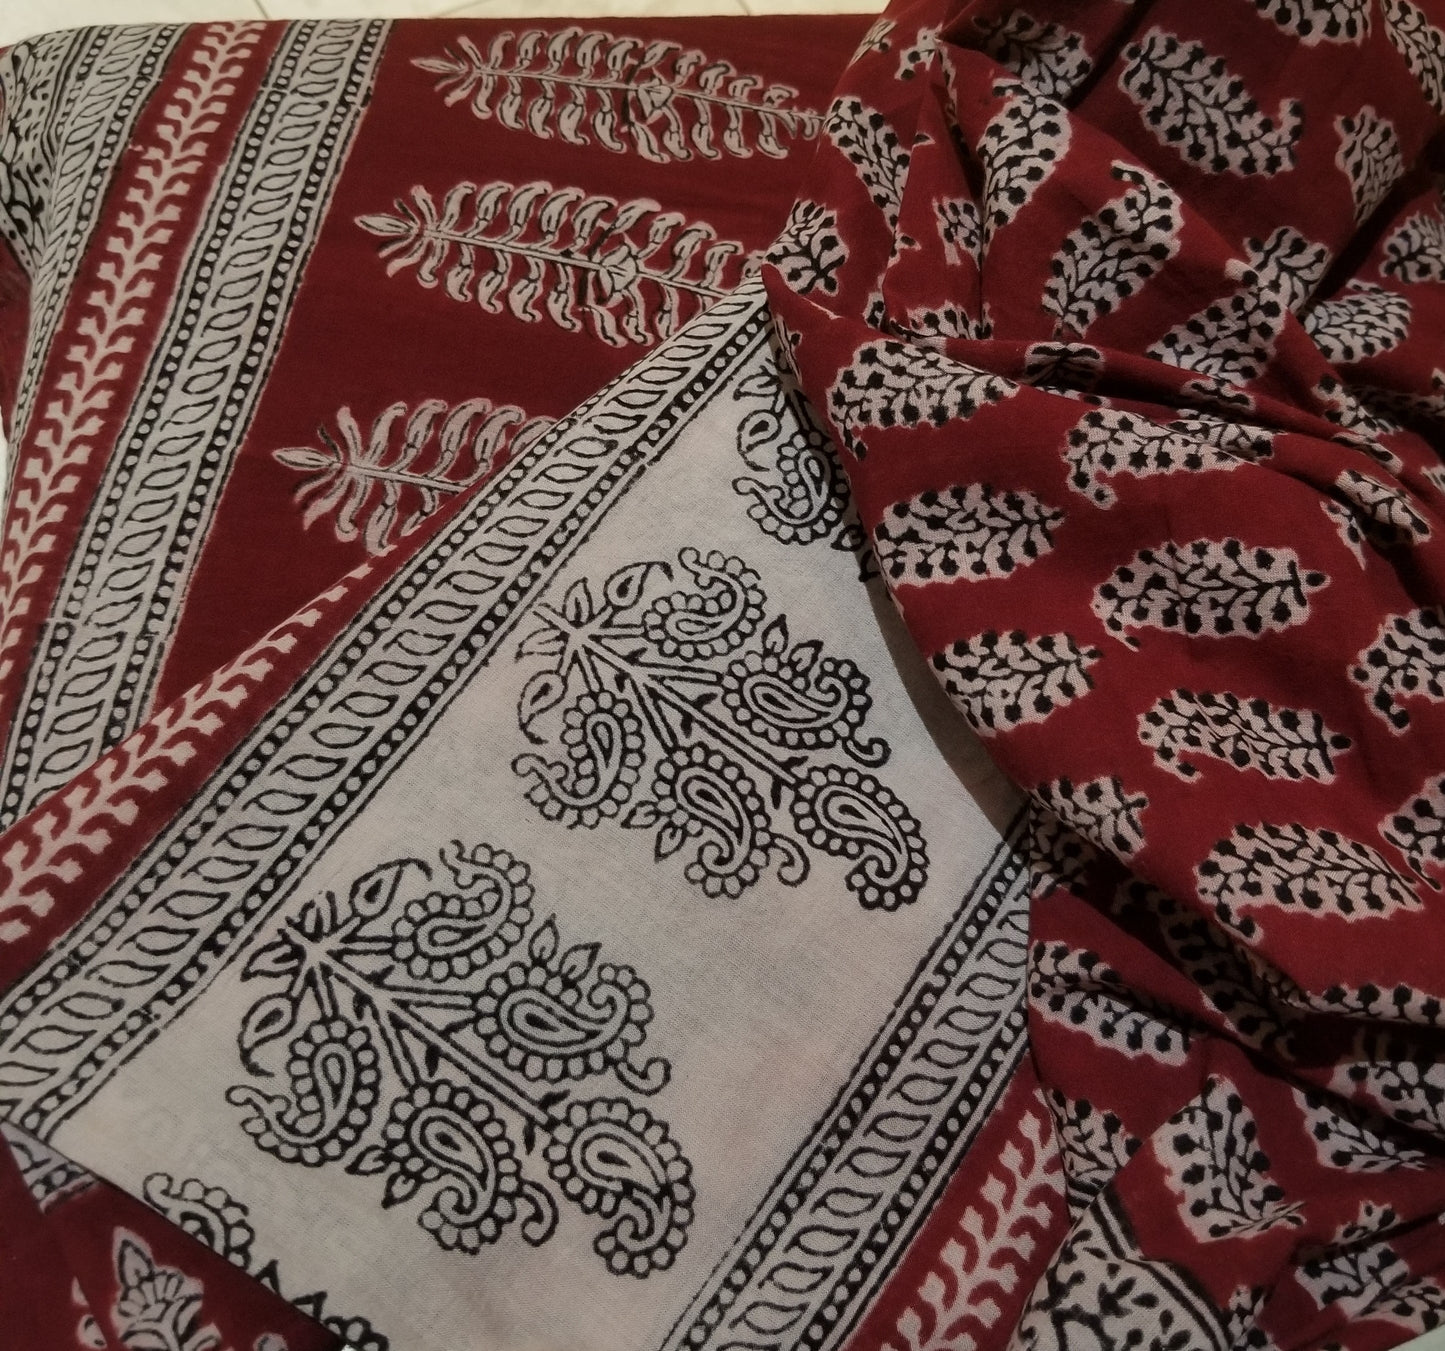 Red and Black Paisely Design Hand Block Printed Naturally Dyed Textiles by OMSutra